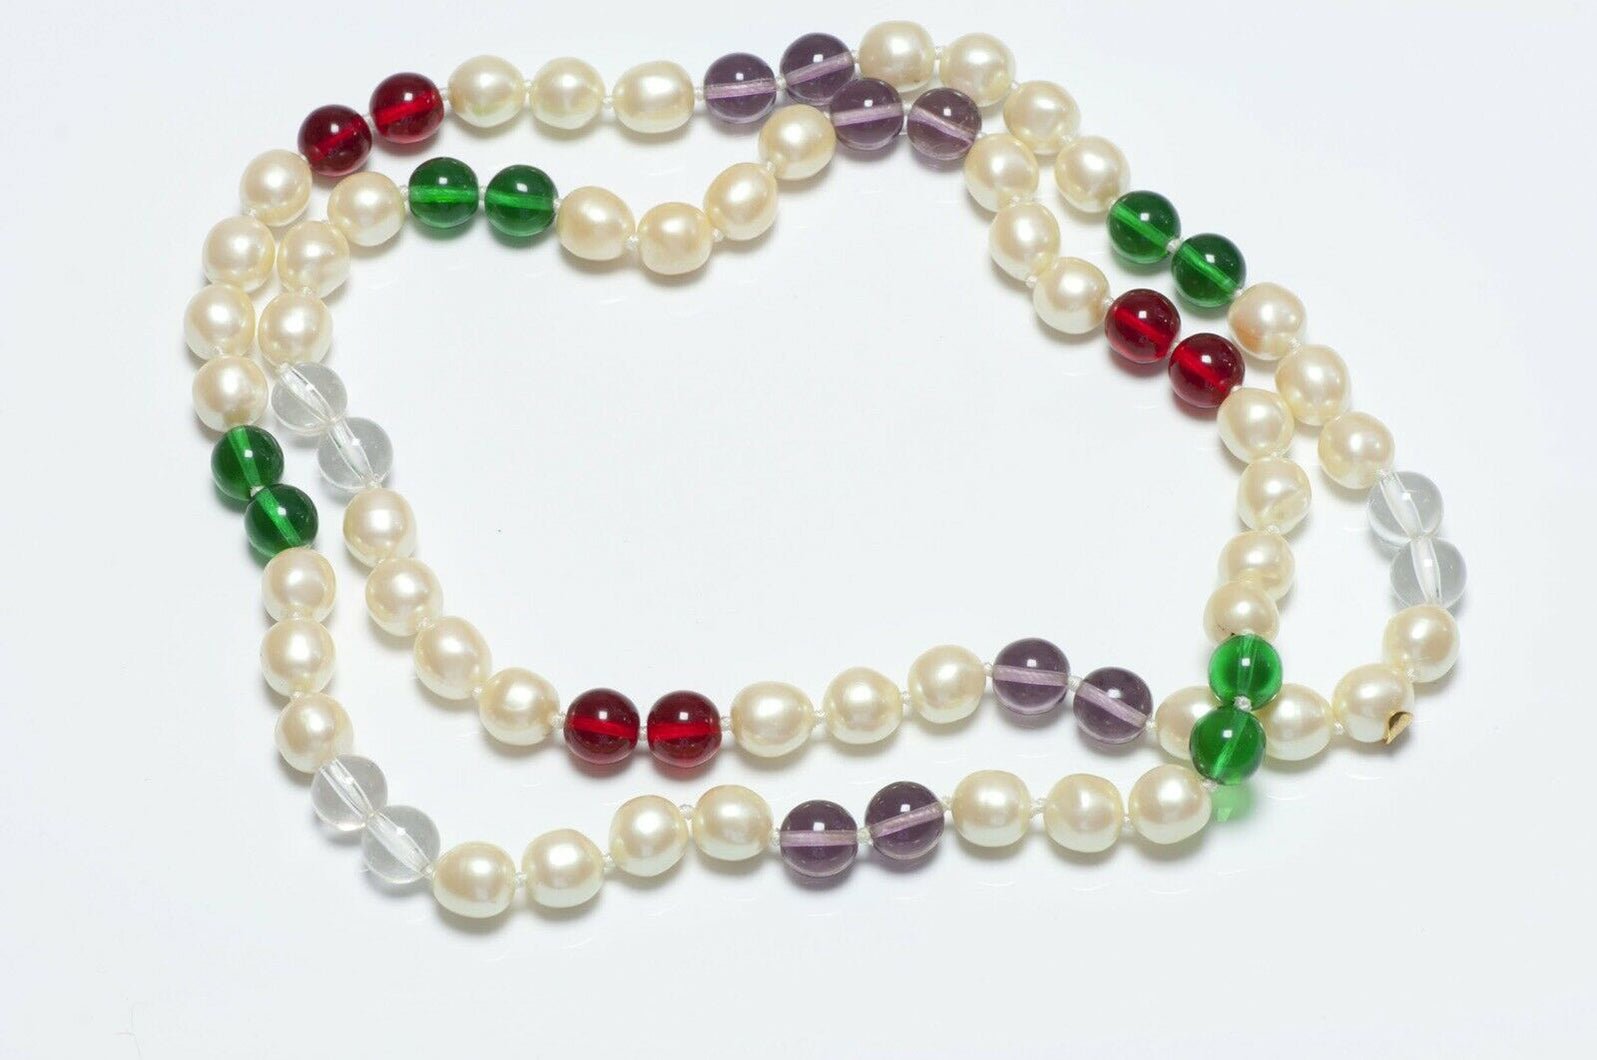 CHANEL 1993 Gripoix Glass Beads Pearl Sautoir Necklace